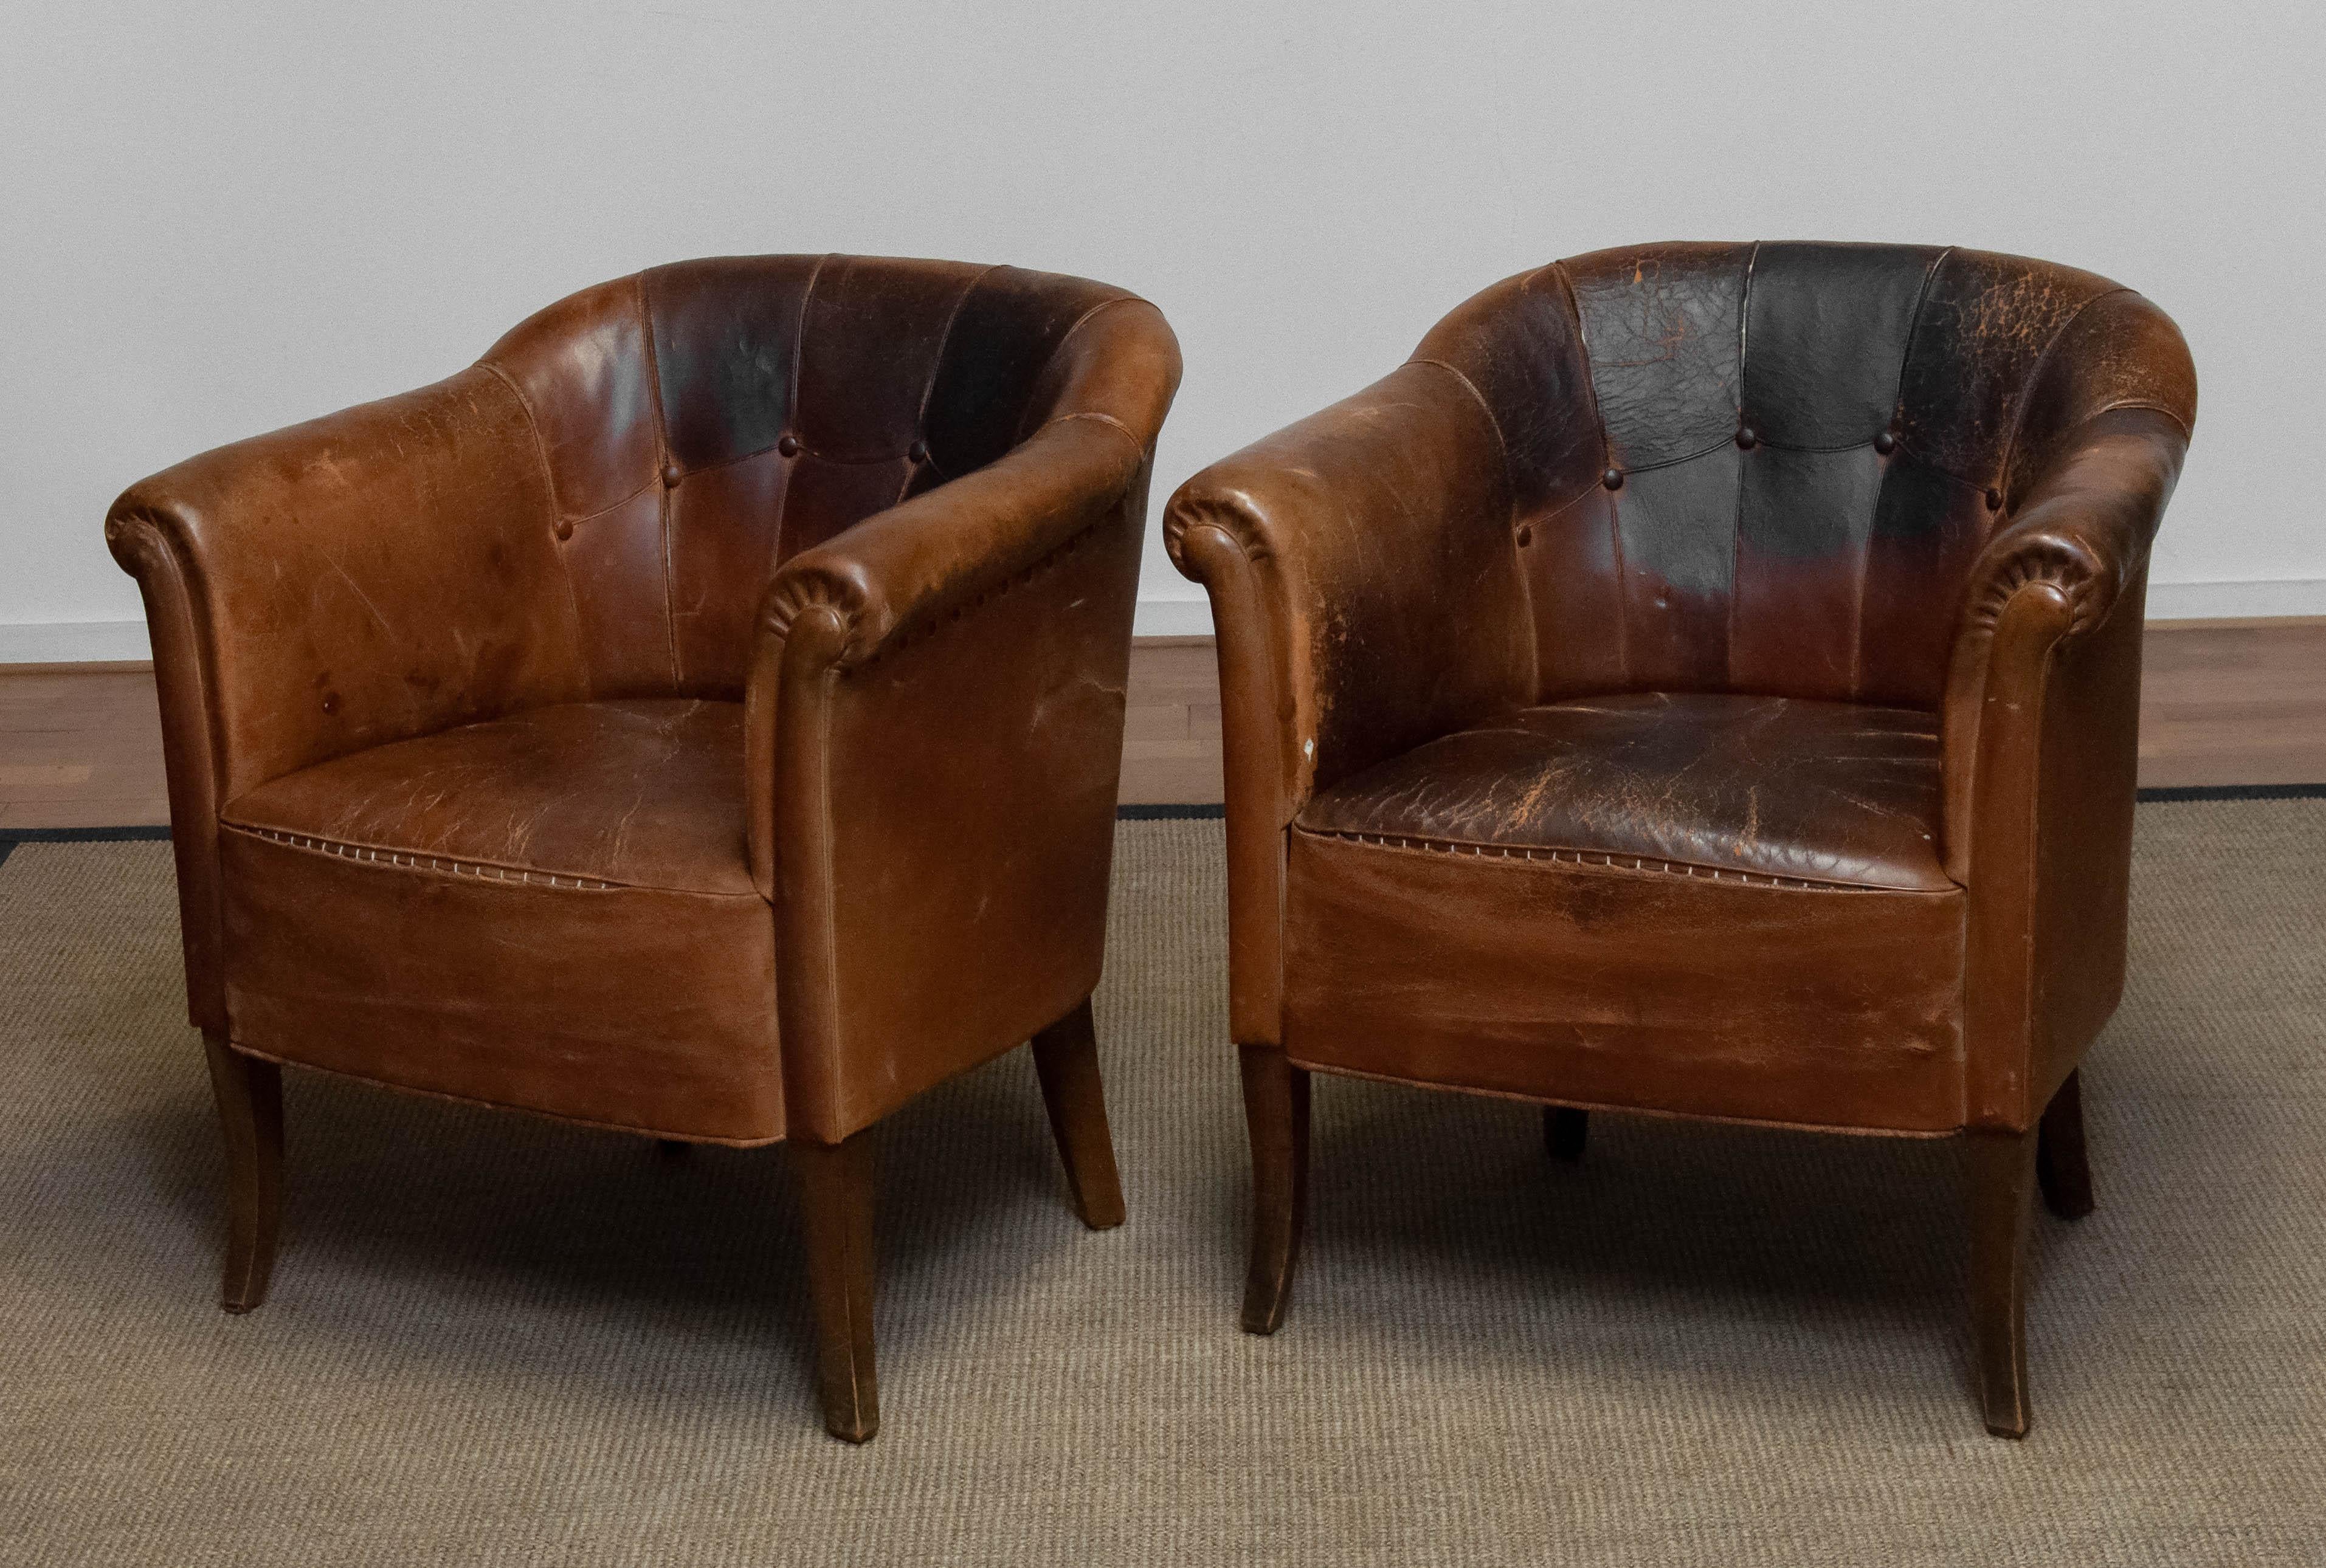 Pair Late 19th Century Swedish Tan / Brown Nailed Leather Lounge / Club Chairs 2